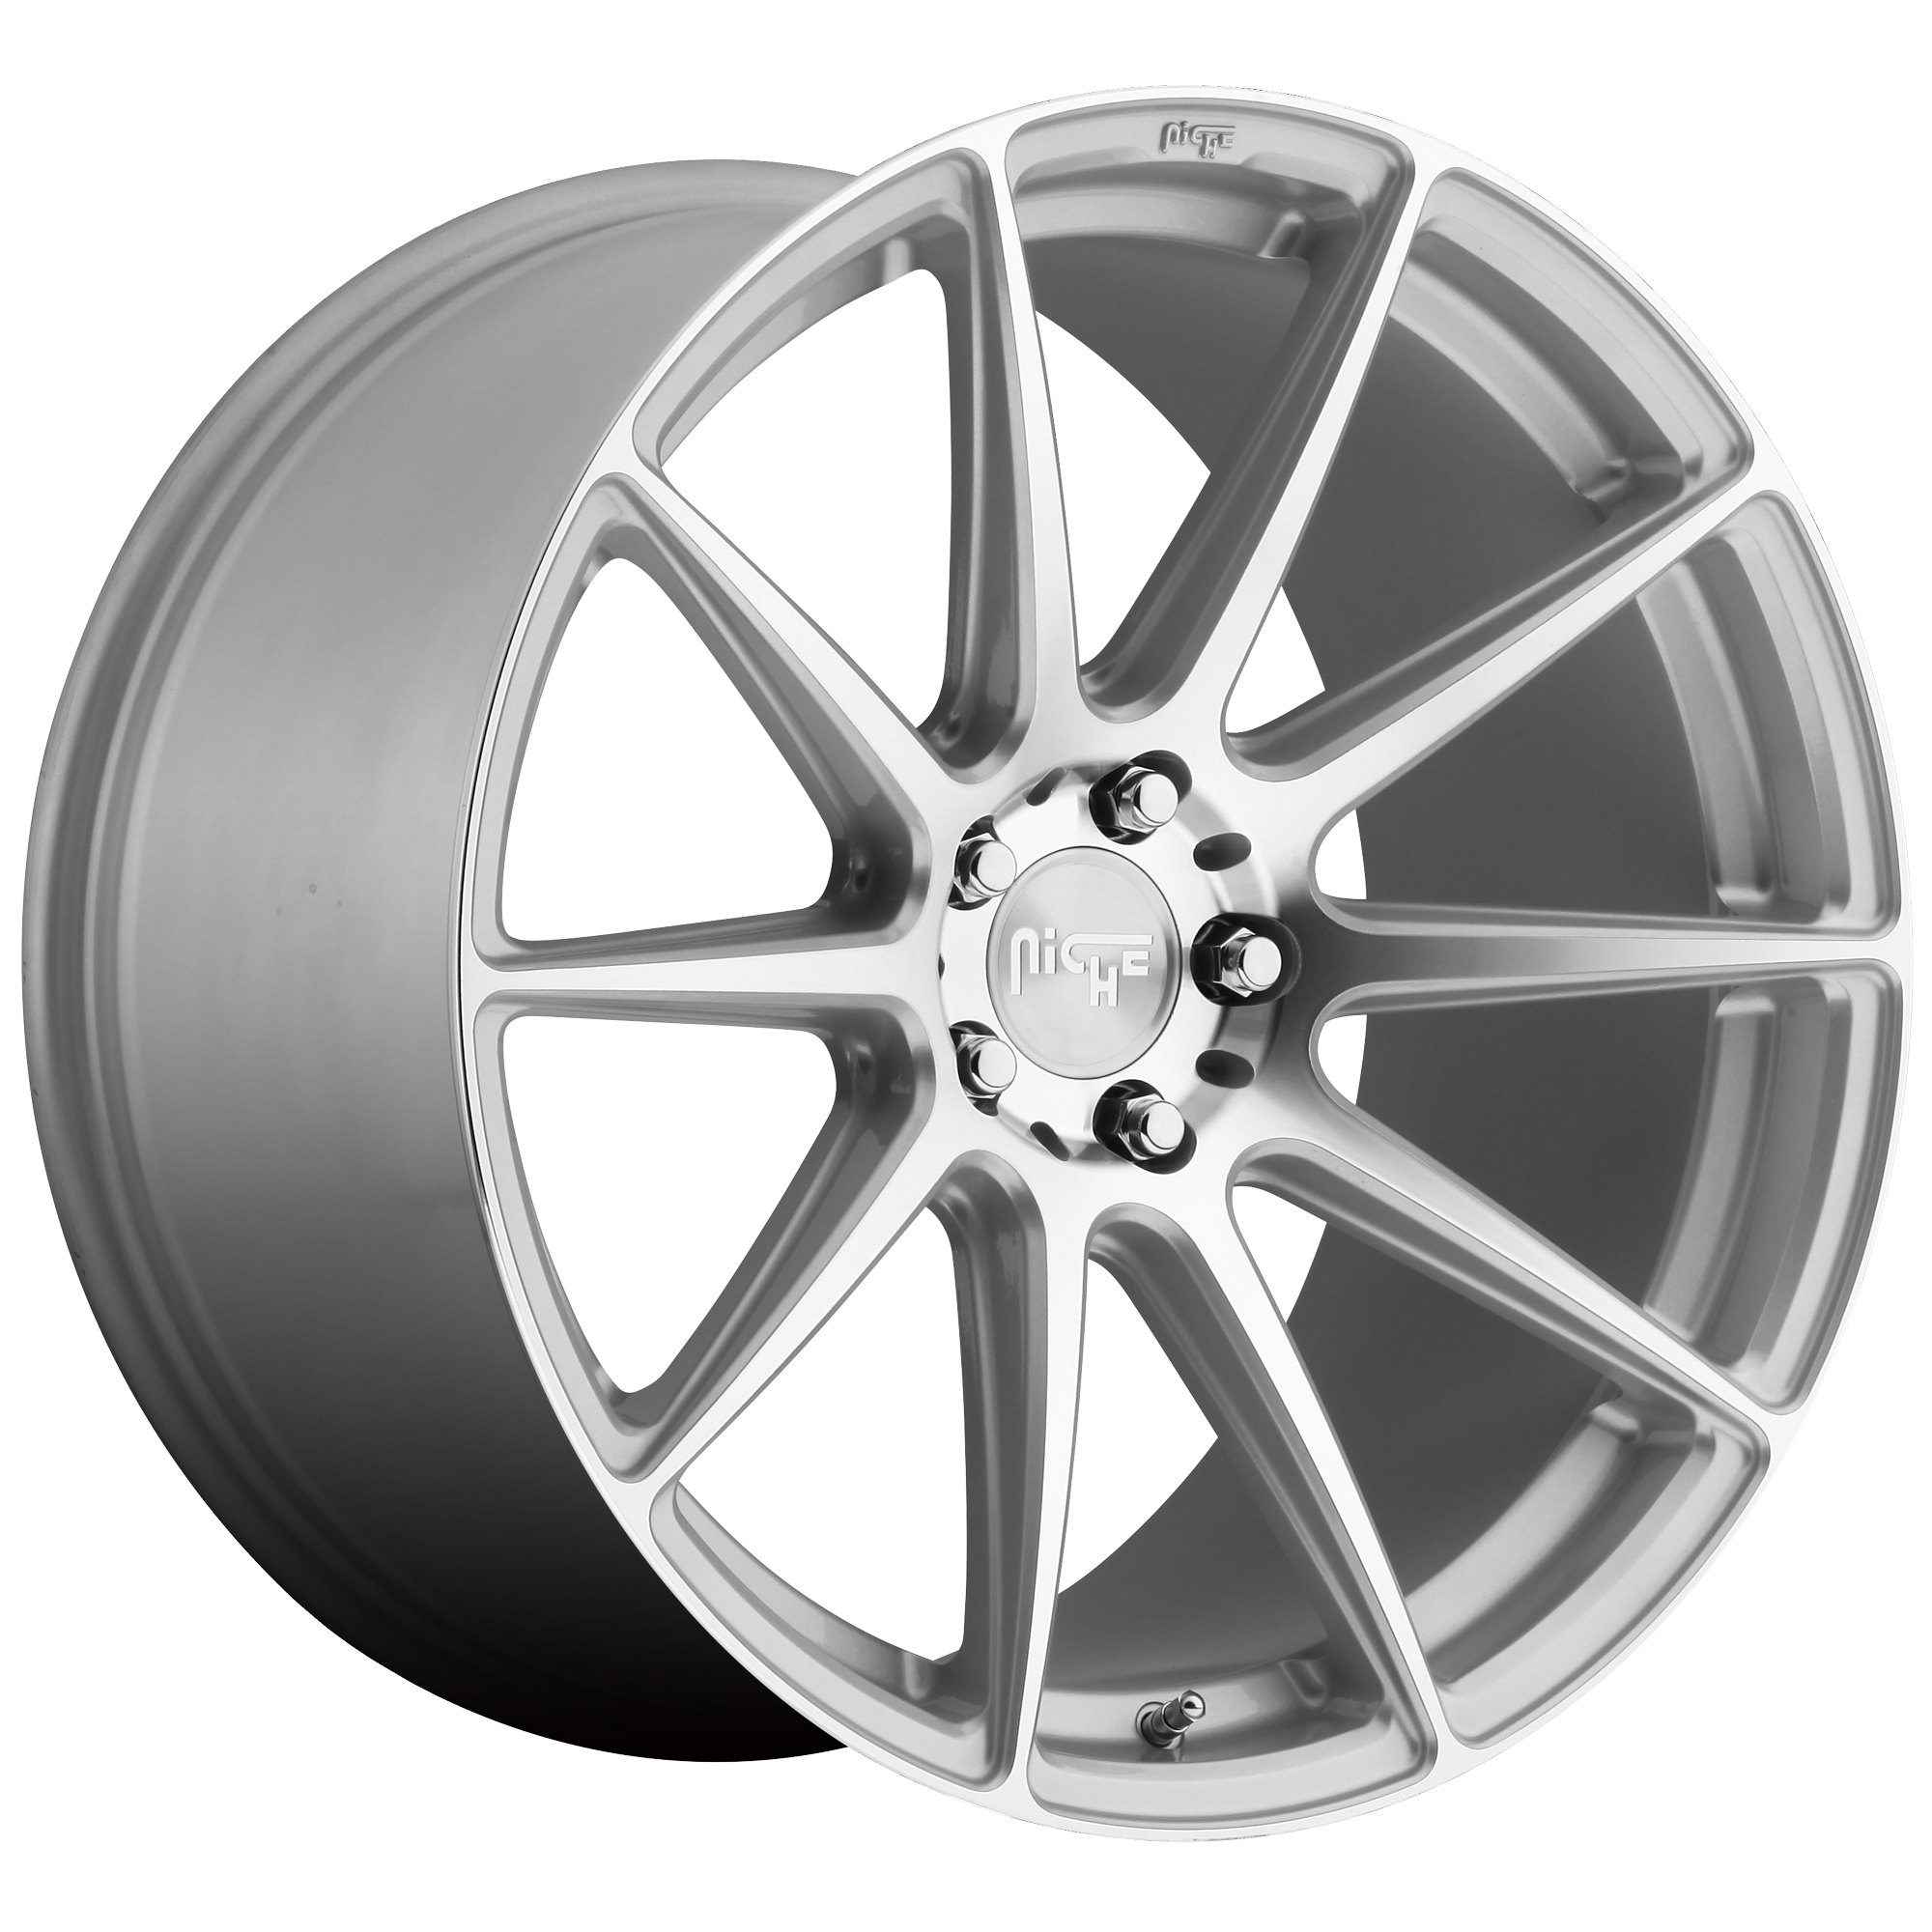 ESSEN 19x8.5 5x112.00 GLOSS SILVER MACHINED (42 mm) - Tires and Engine Performance